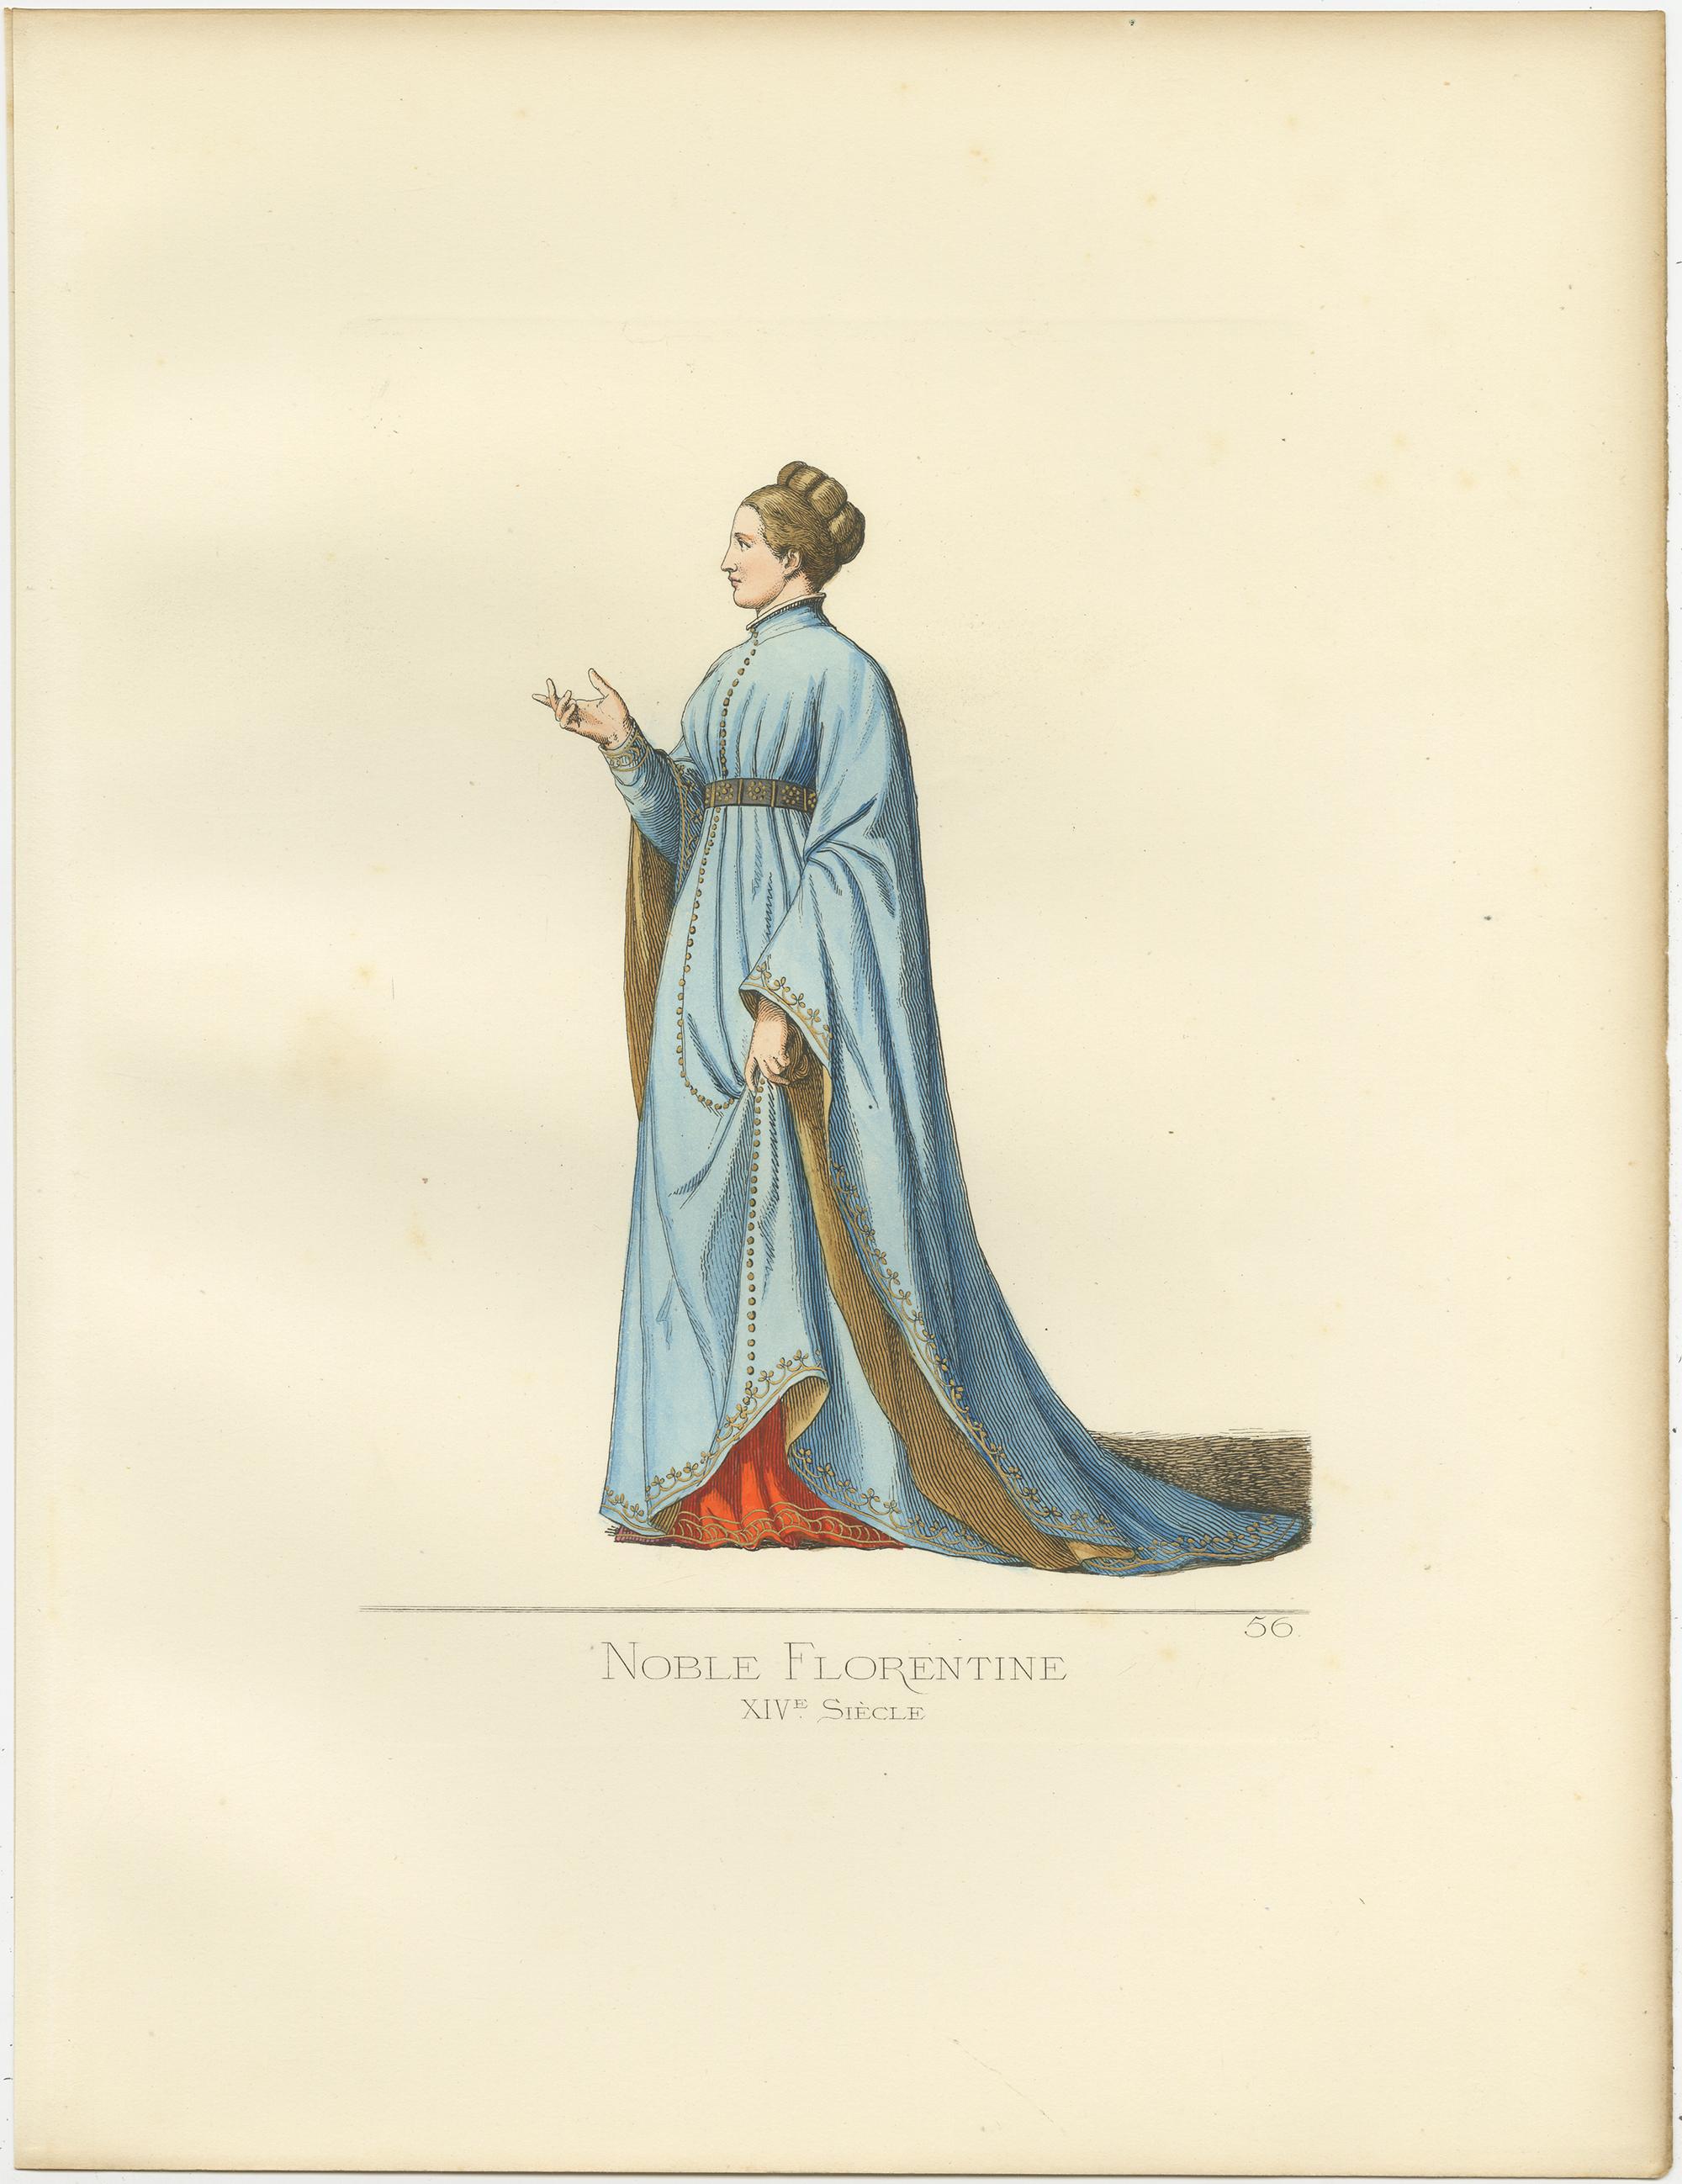 Antique print titled ‘Noble Florentine, XIVe Siecle.’ Original antique print of a noblewoman from Florence in Italy, 14th century. This print originates from 'Costumes historiques de femmes du XIII, XIV et XV siècle' by C. Bonnard. Published, 1860.